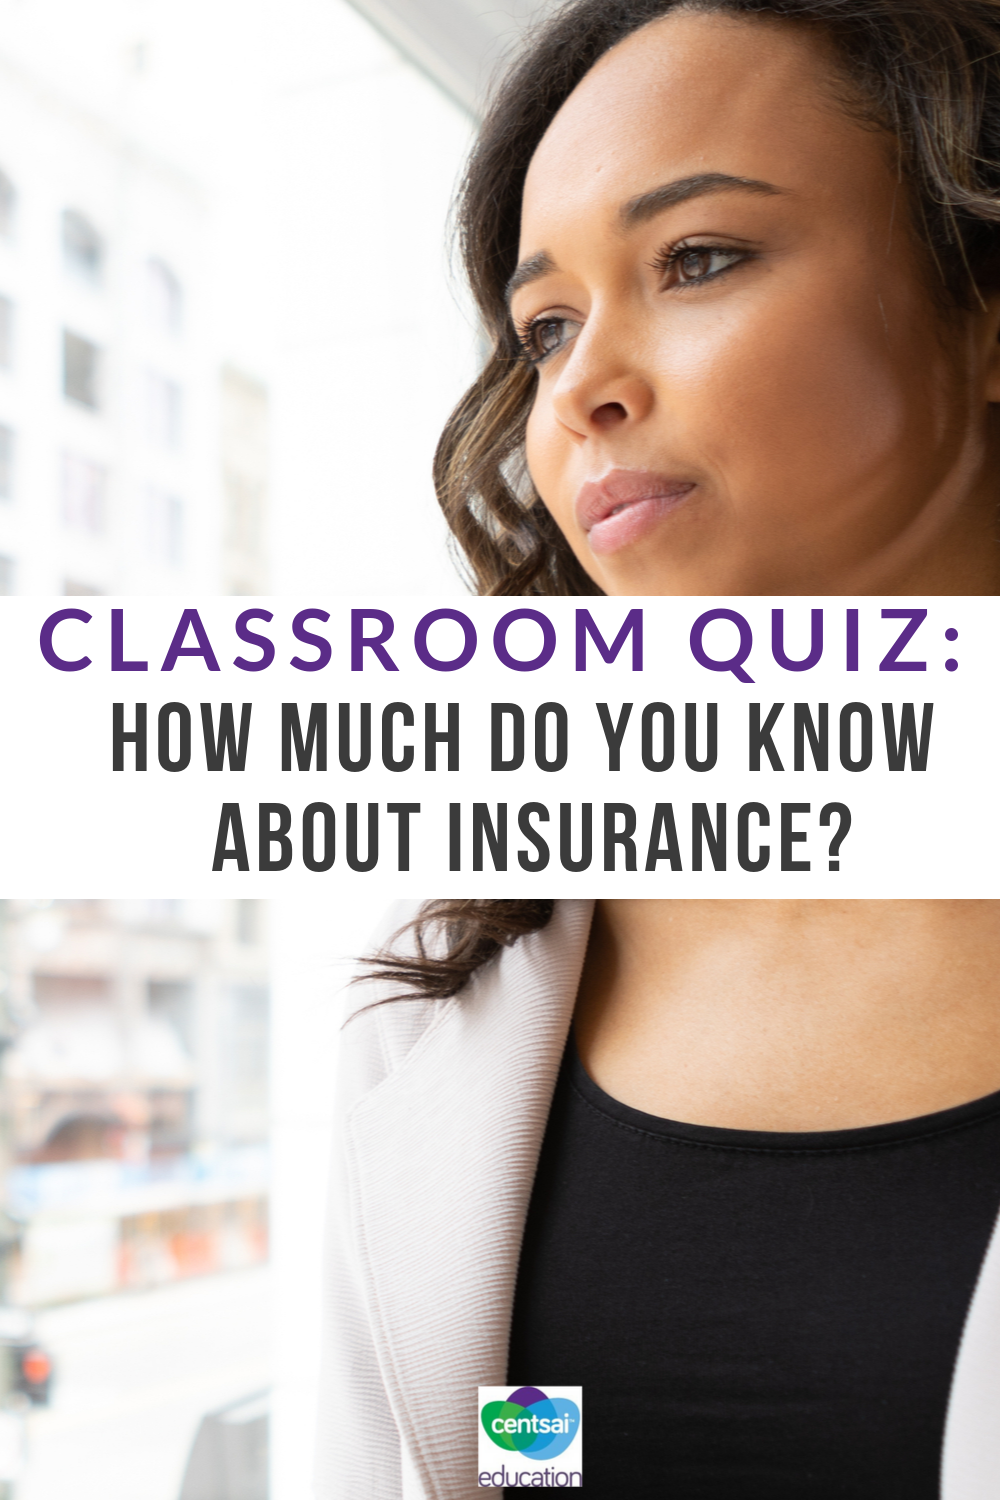 For those students who don't already know about insurance, it can be difficult to know which way is up. Find out how much your classroom knows. #healthinsurance #personafinance #Lifeinsurancefacts #lifeinsurance